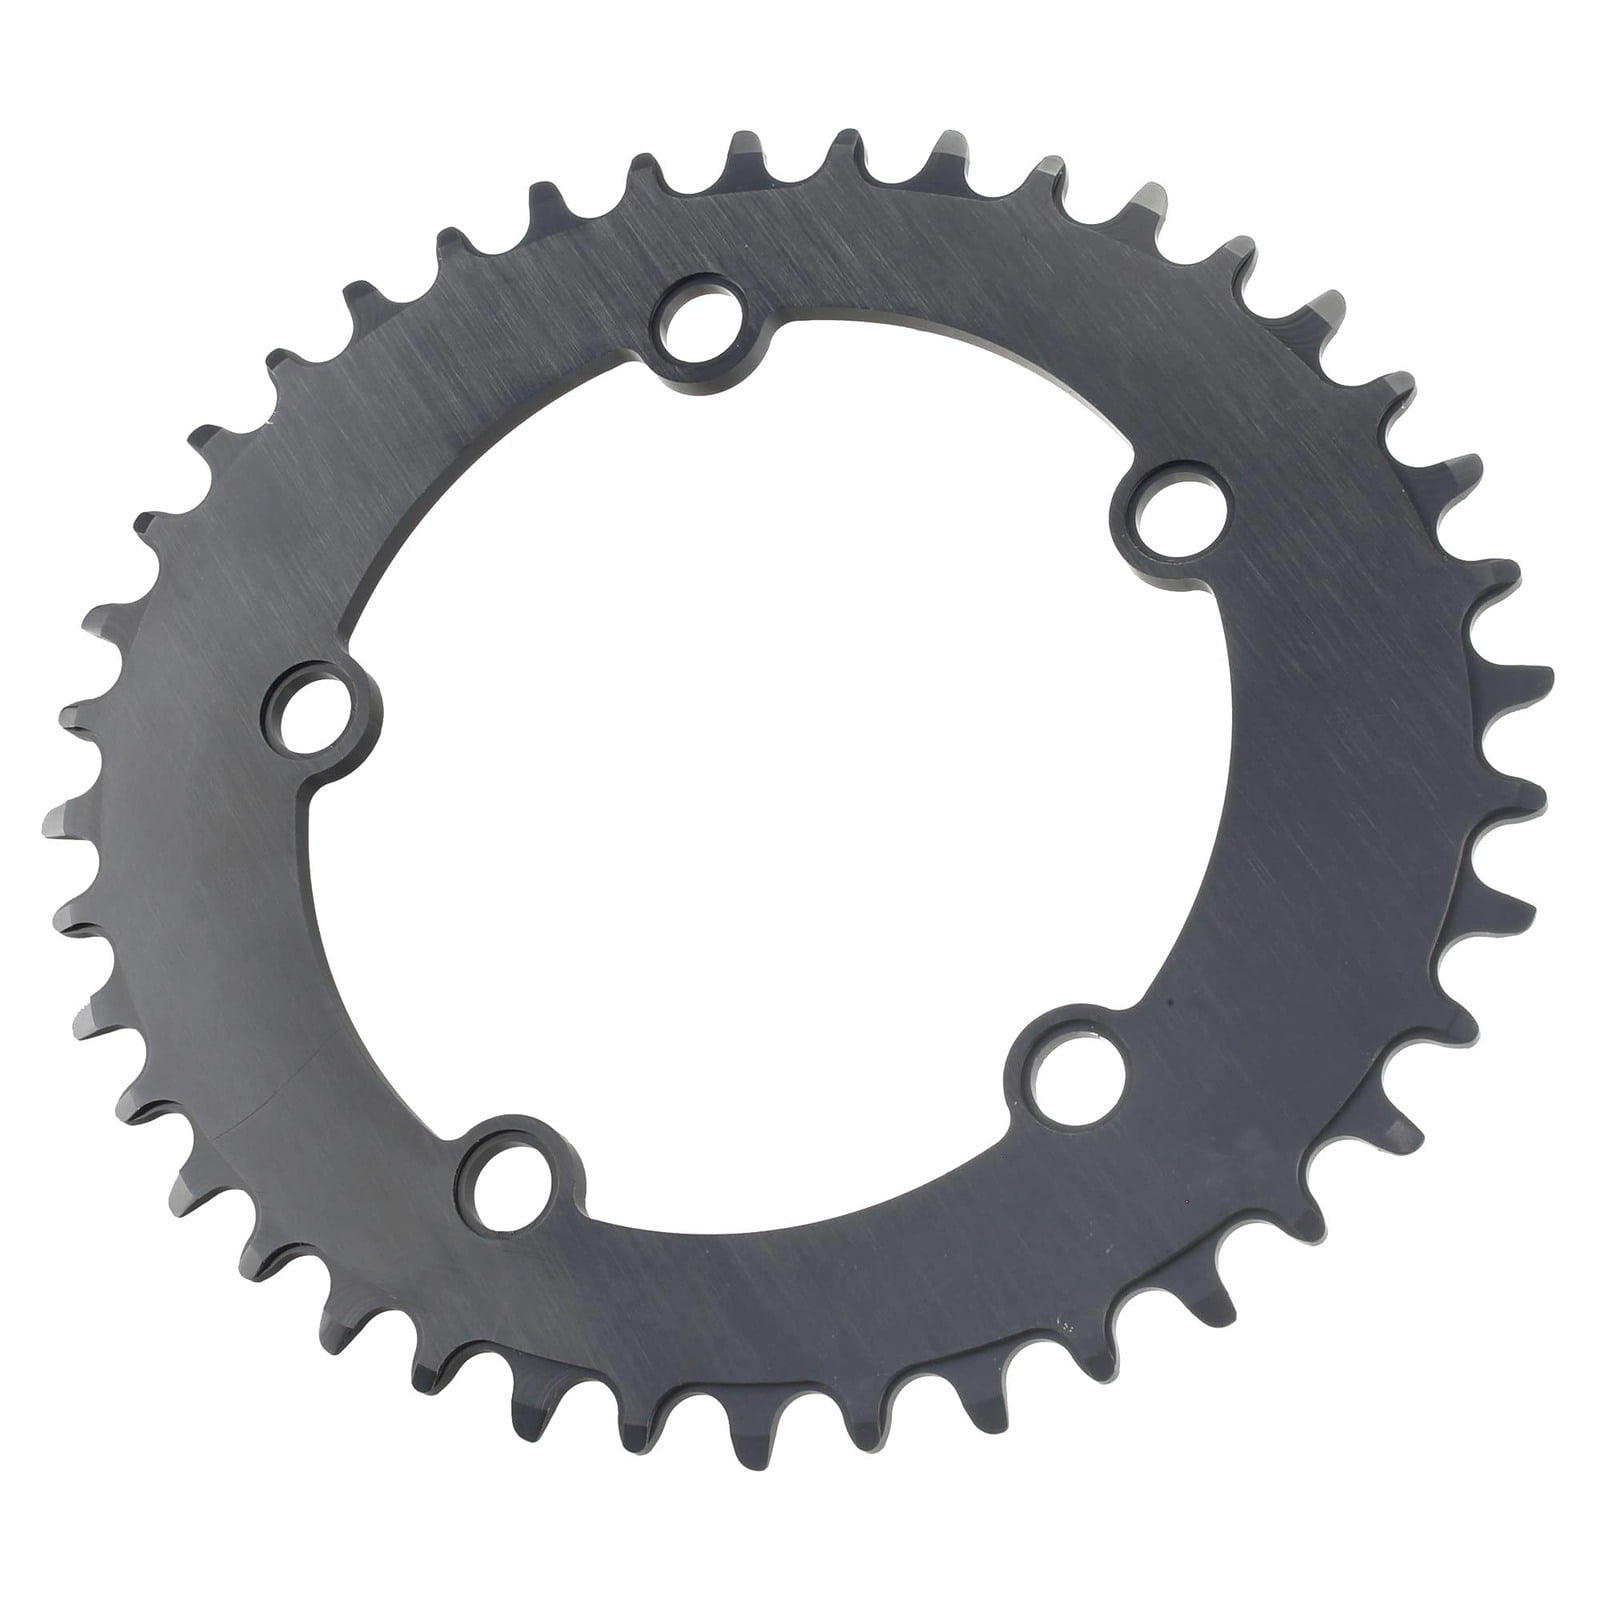 First Cyclingdeal Road Bike Oval Narrow Wide Single Chainring BCD 110mm